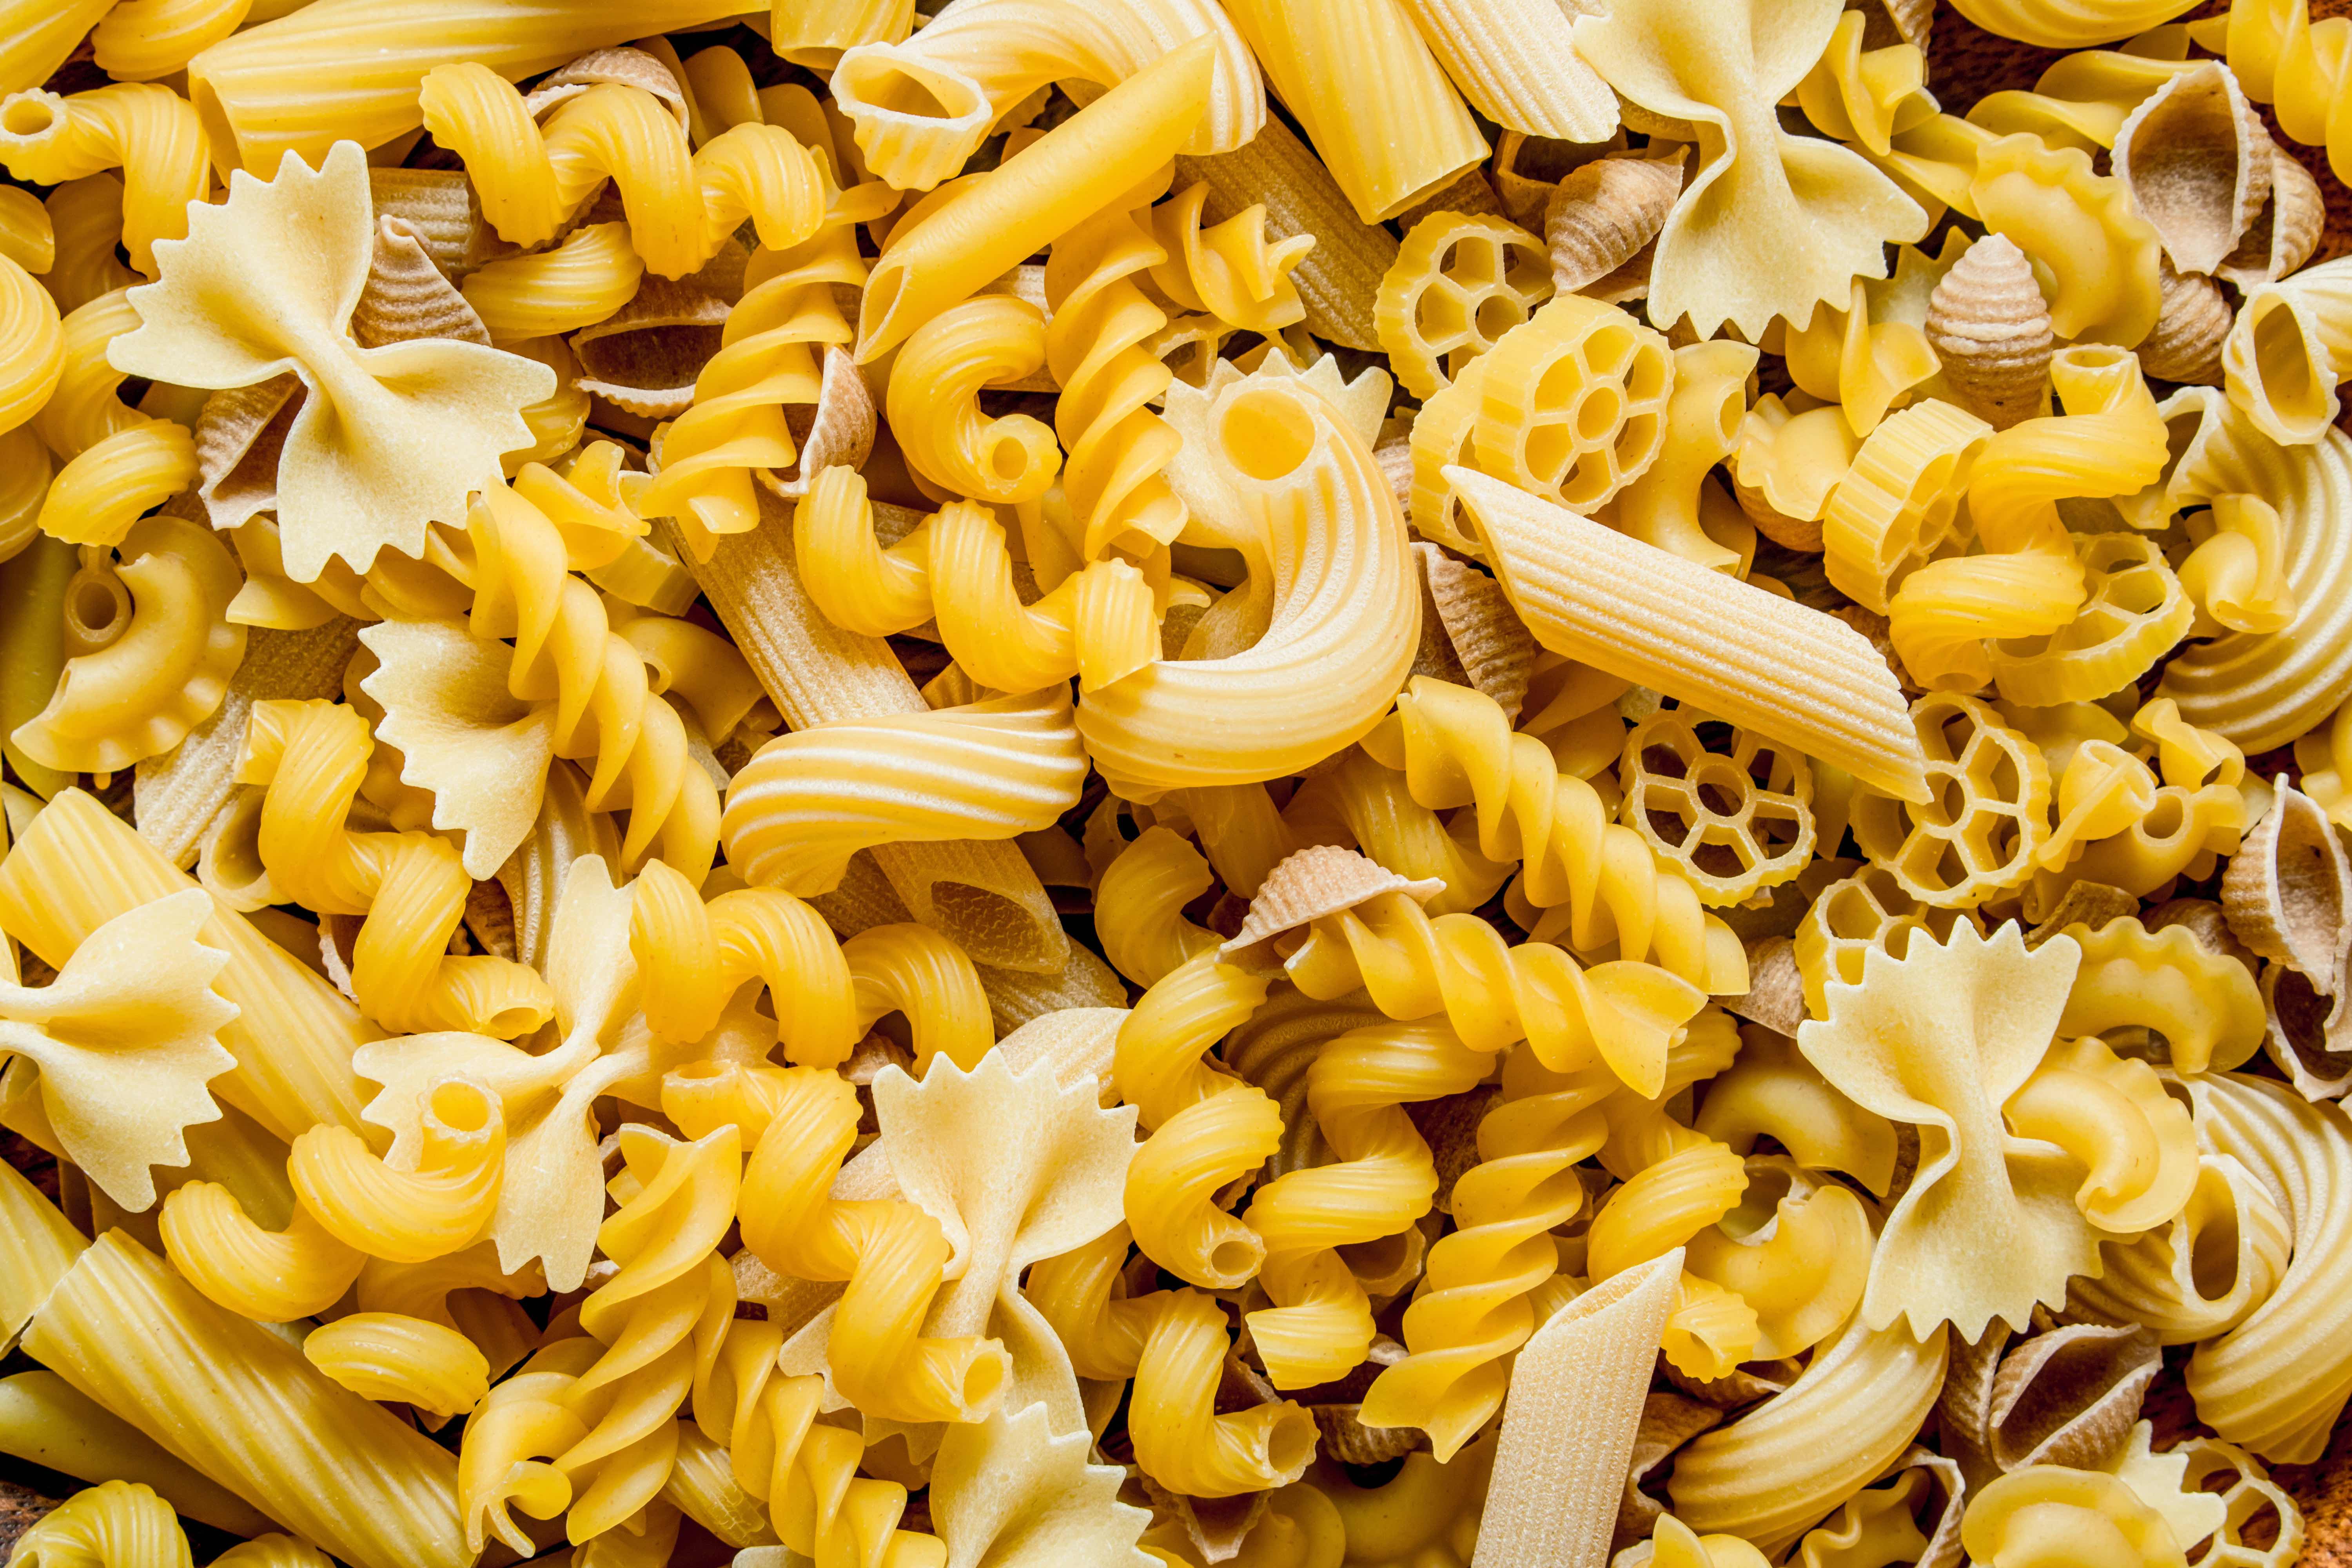 Types of Pasta and Their Best Pairing Sauces | Facts.net